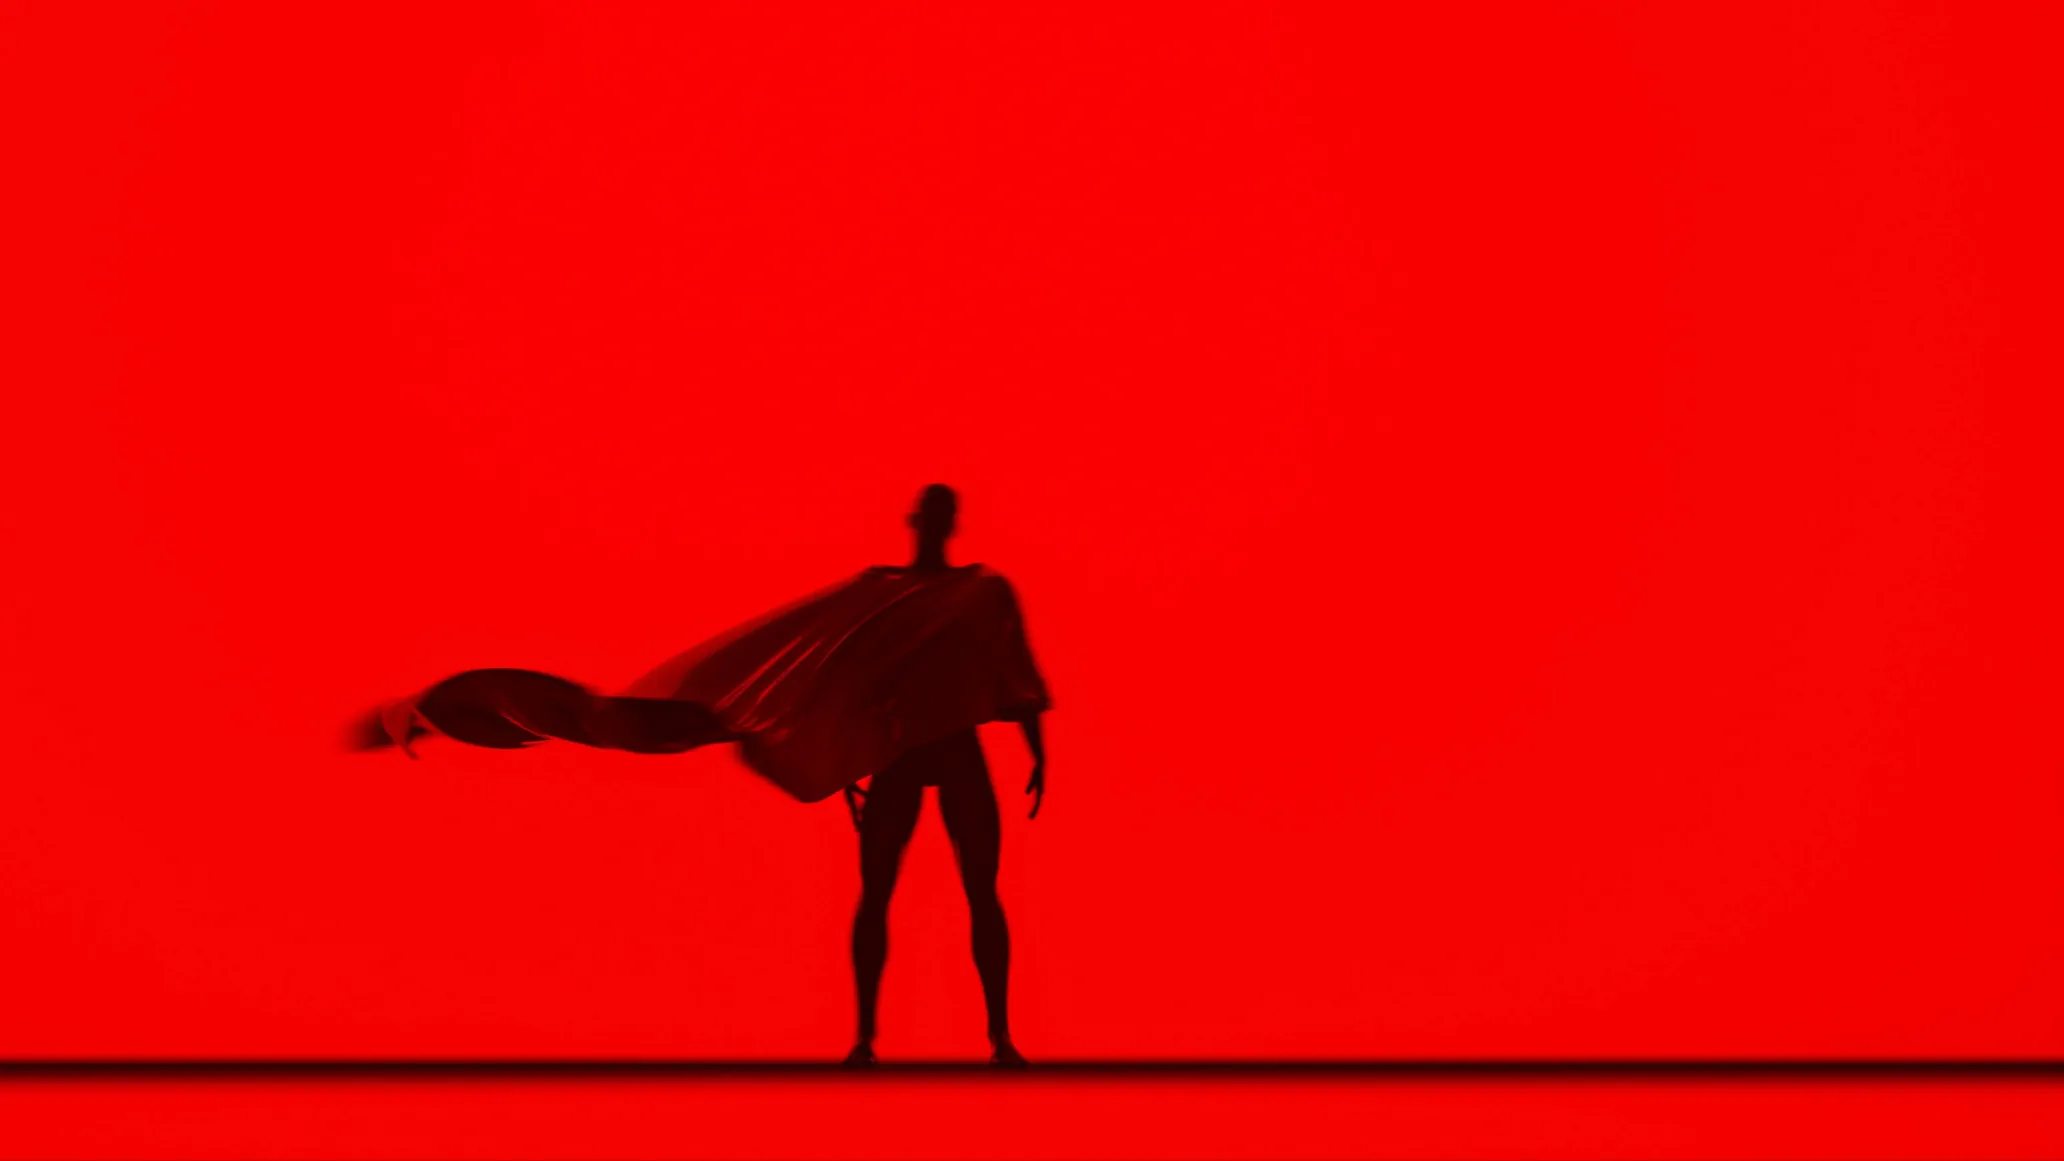 Silhouette of superhero wearing a cape placed on entirely red backdrop.